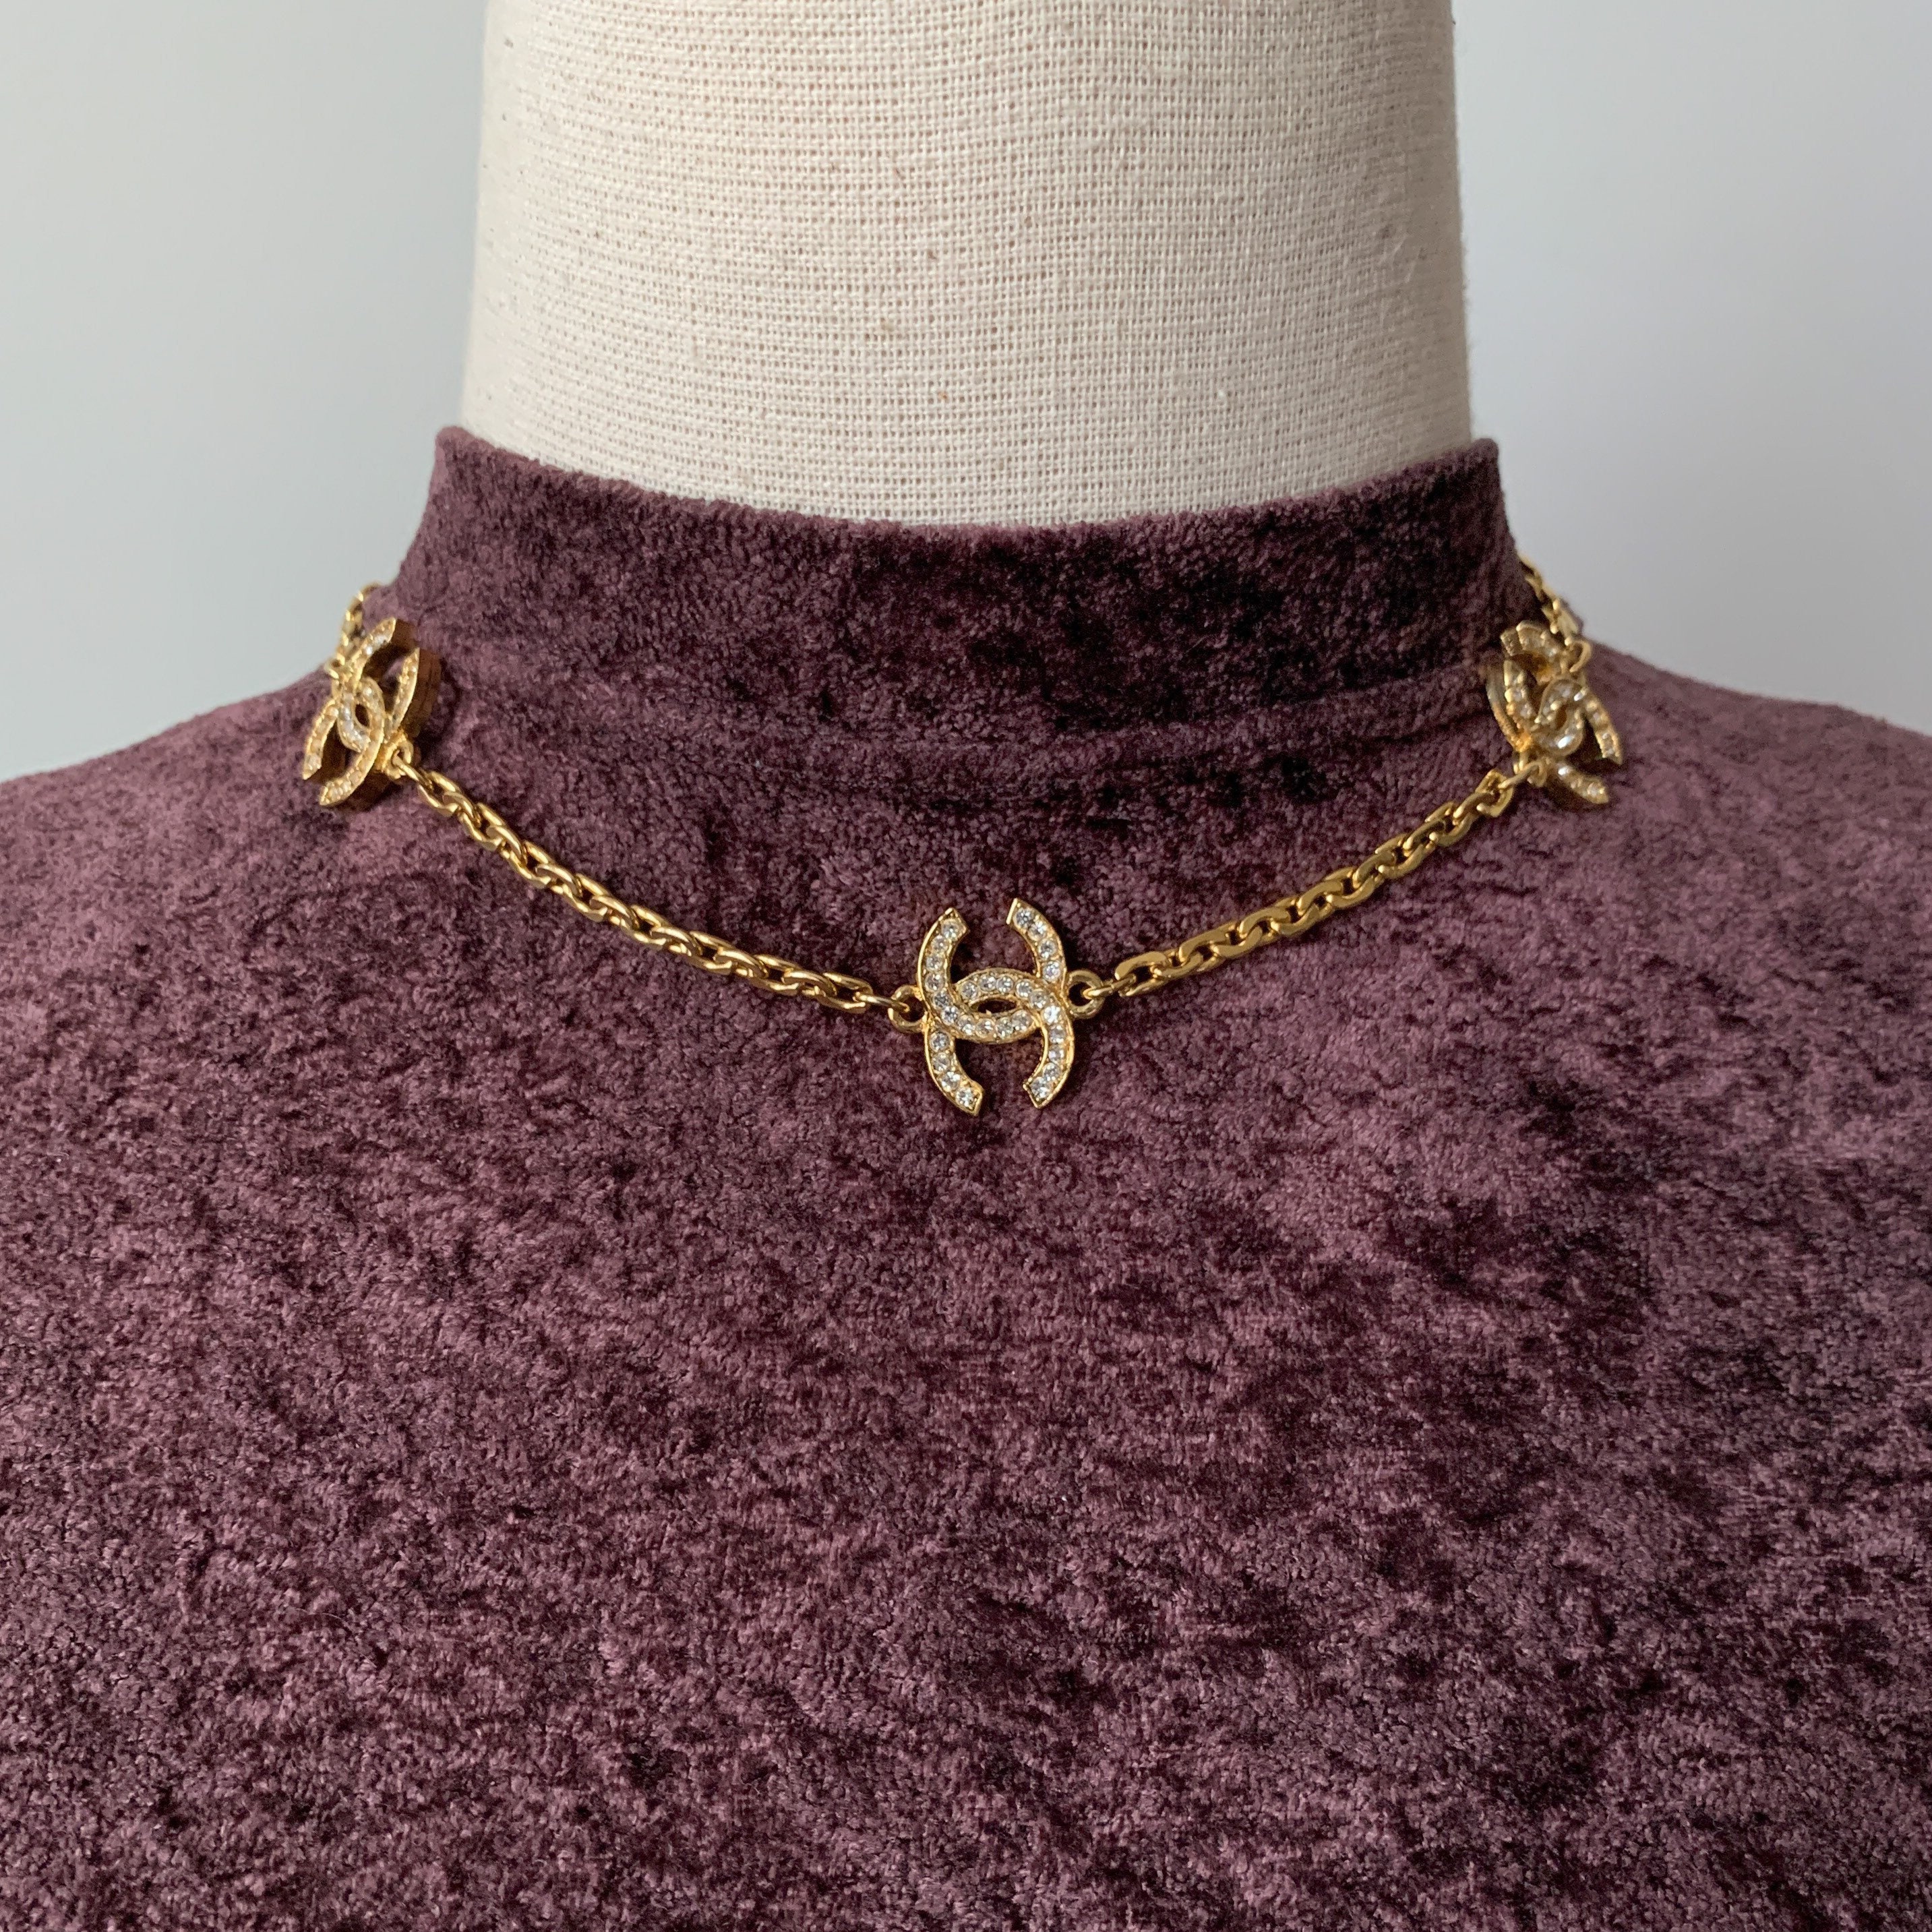 Vintage 80s CHANEL Crystal CC Choker Necklace 